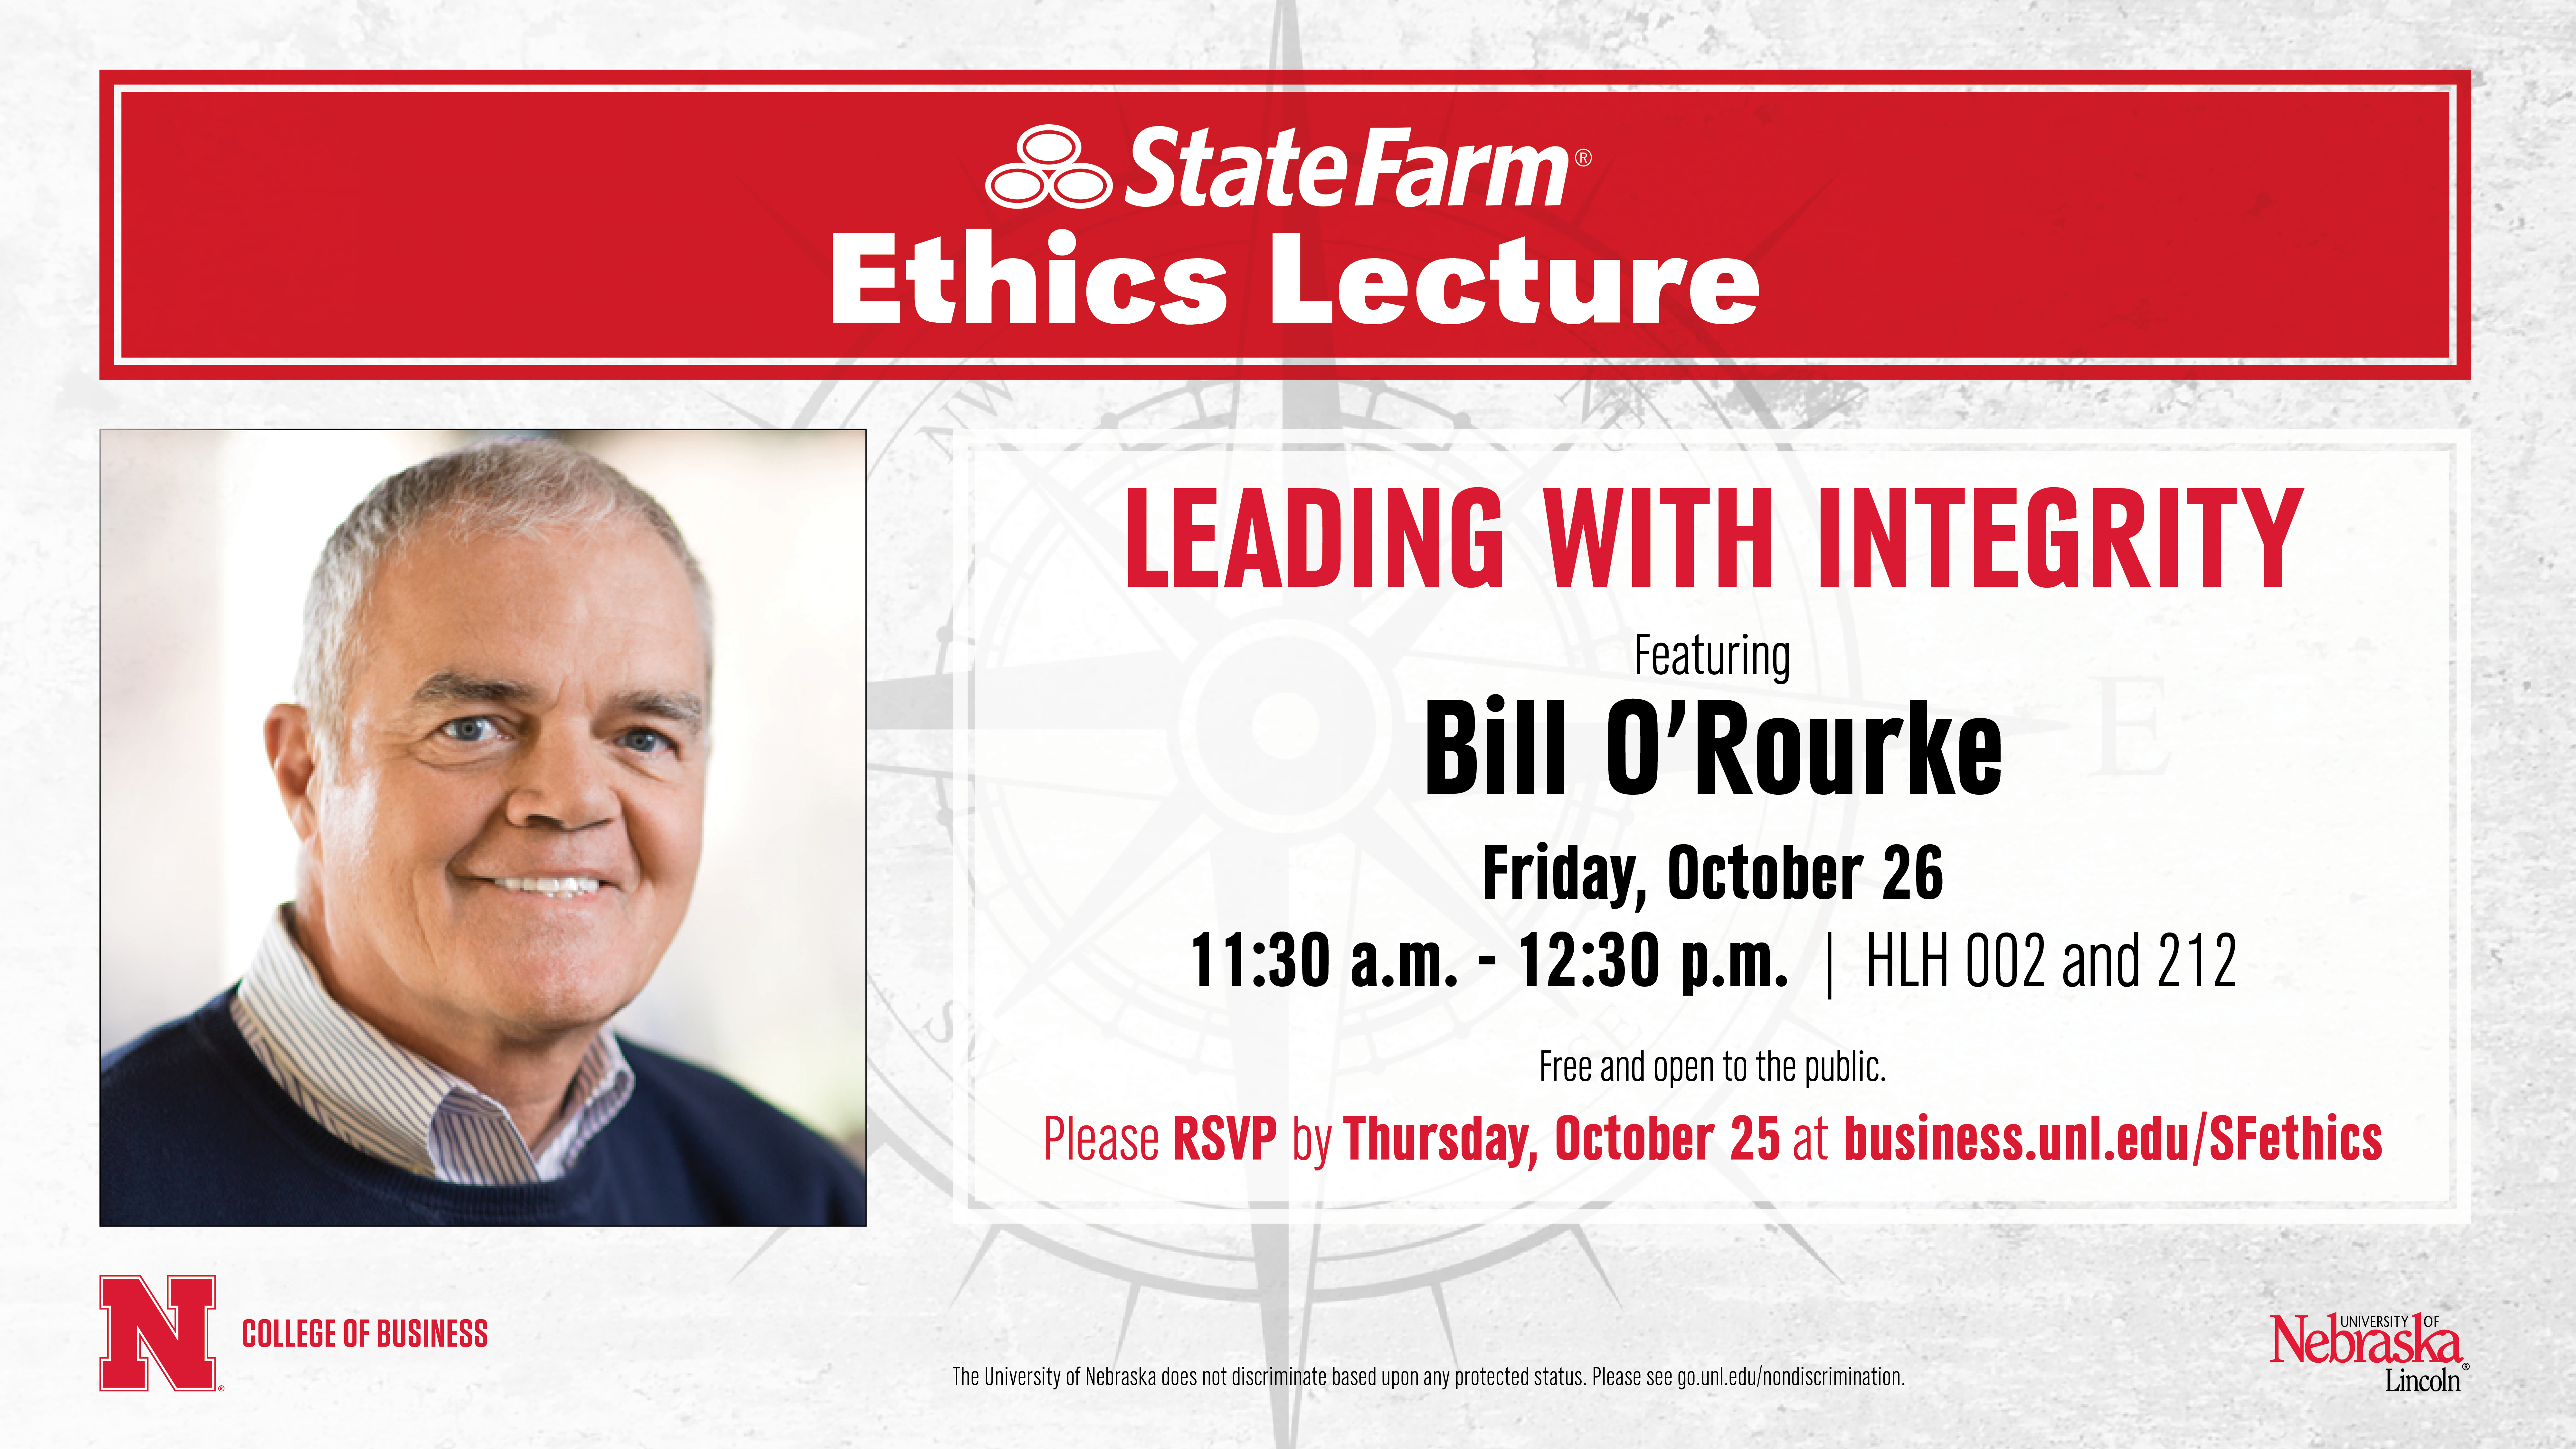 O'Rourke will discuss leading with integrity. RSVP at business.unl.edu/SFethics.